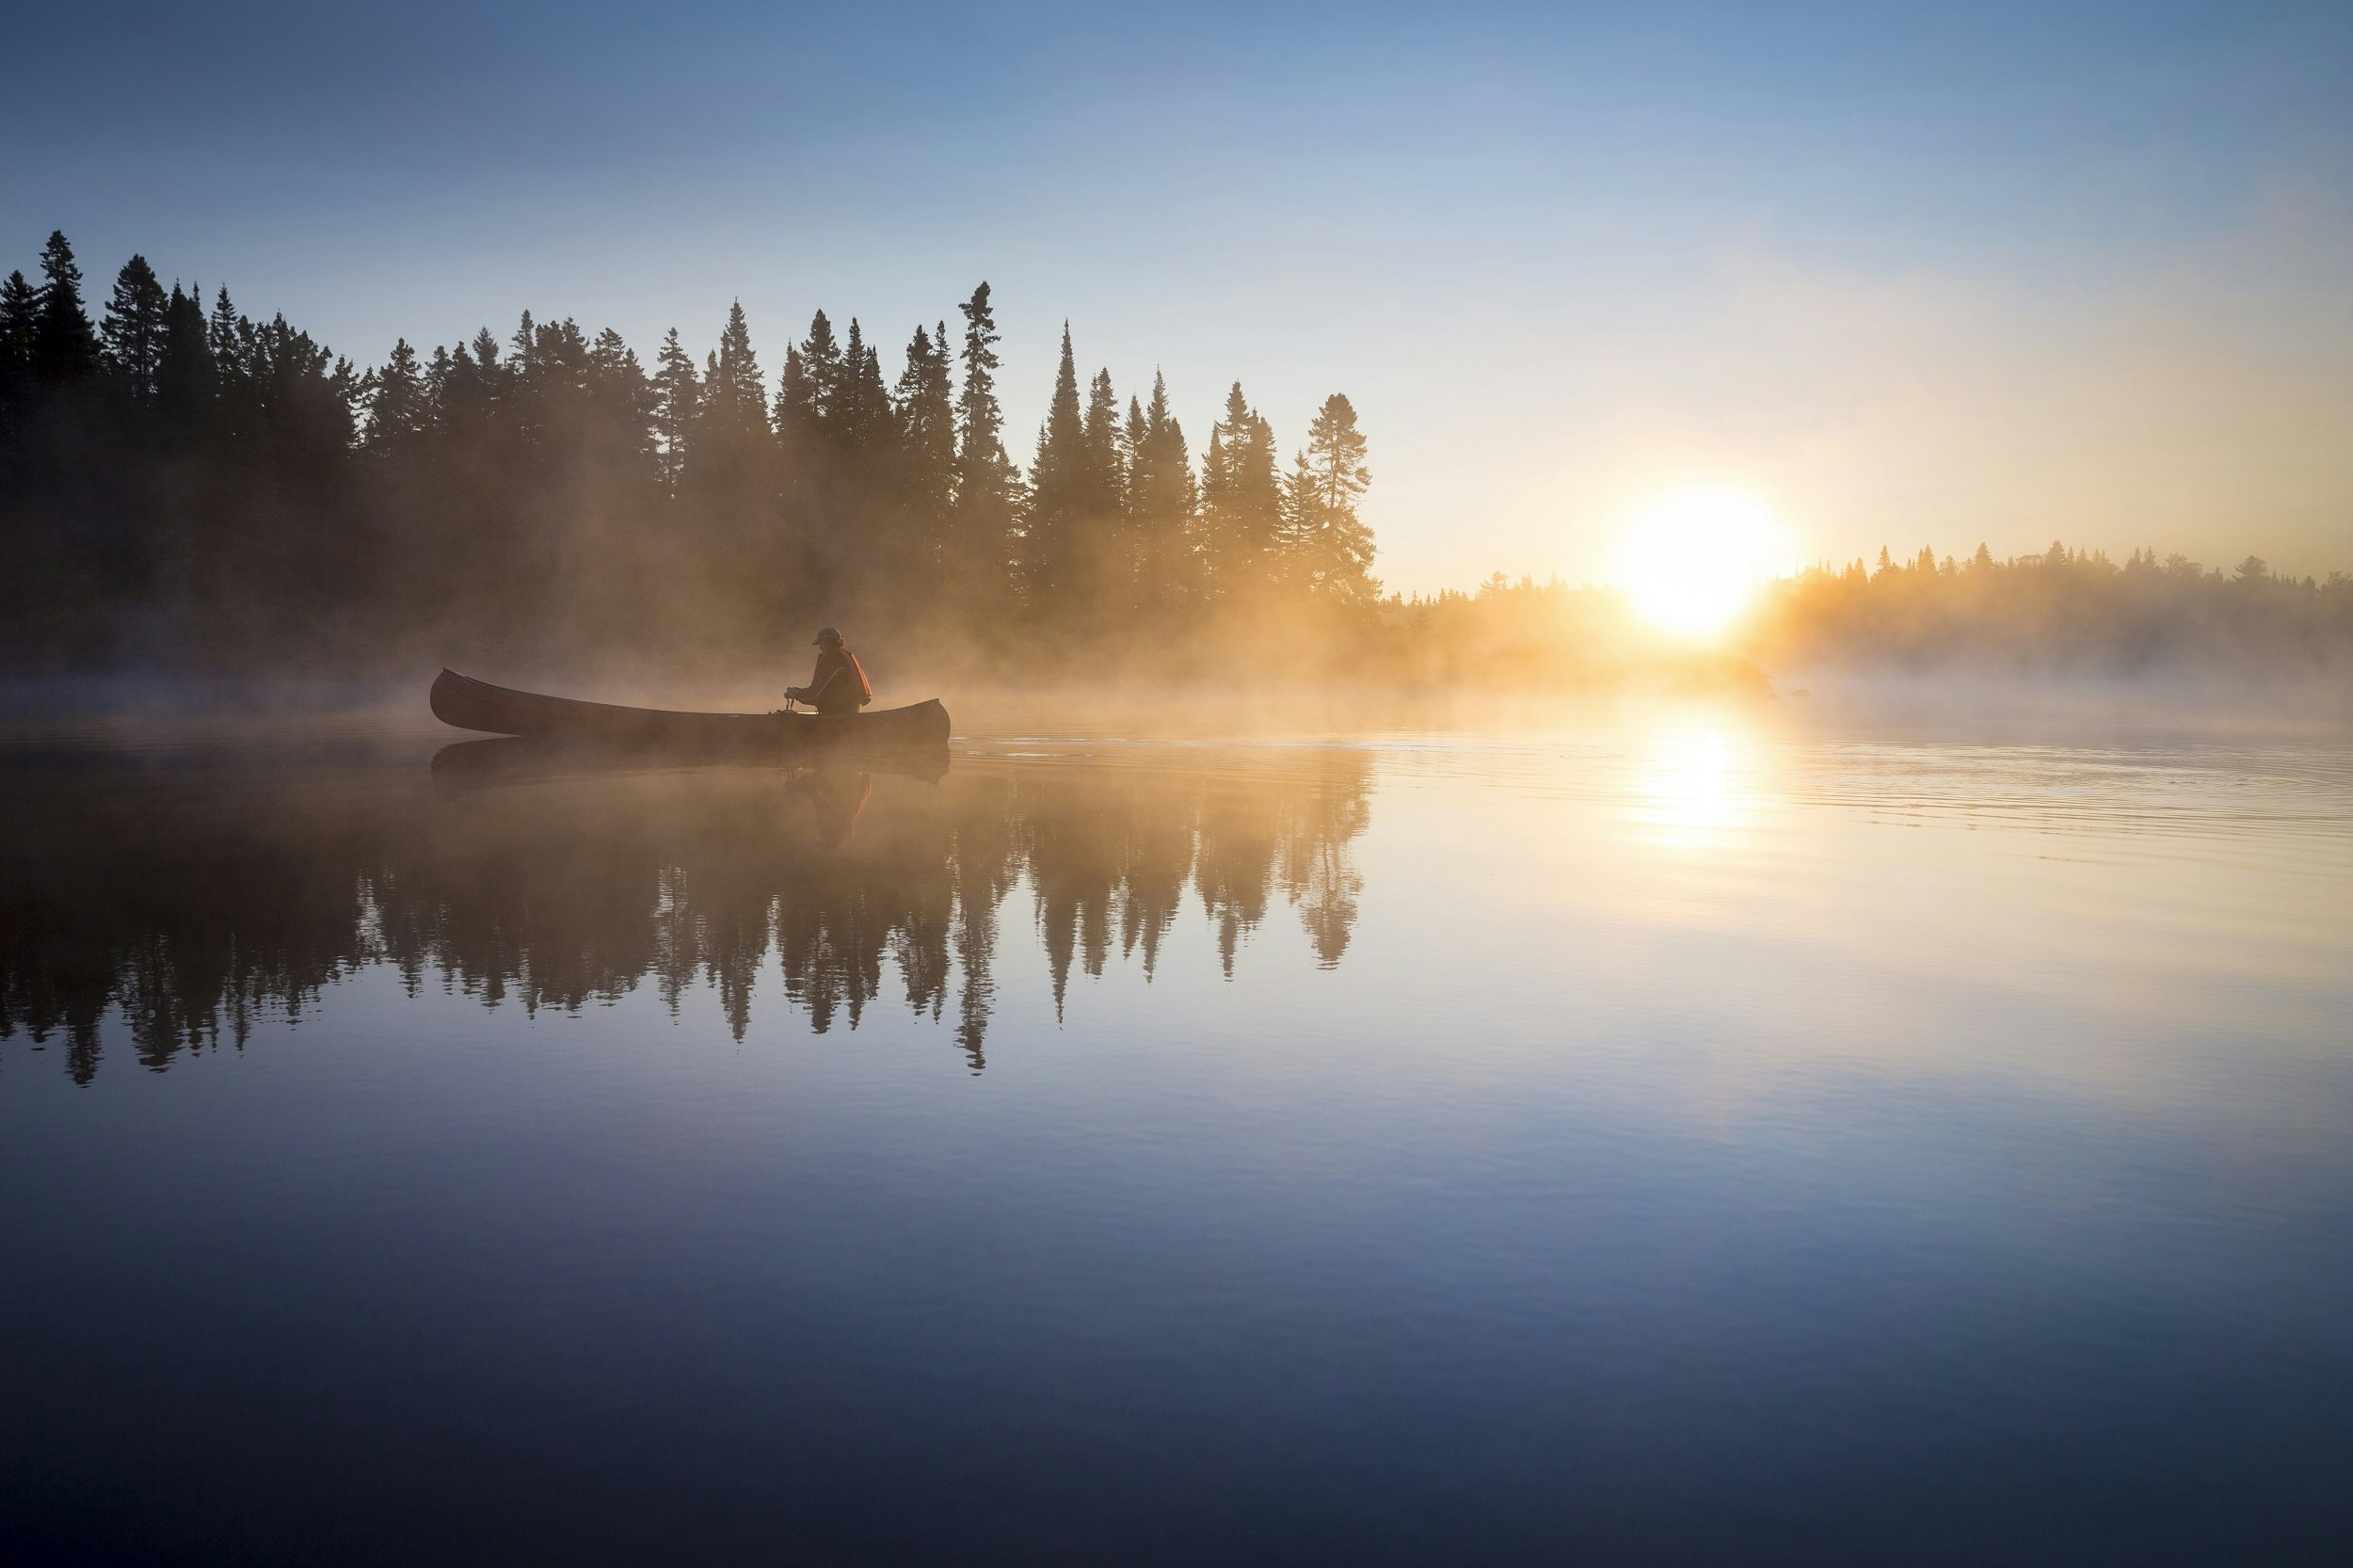 A single paddler canoes across a lake at sunrise; a light blanket of mist covers surface, with the silhouetted trees reflecting off the mirror-calm lake. The sun pierces the horizon, just above the treeline.